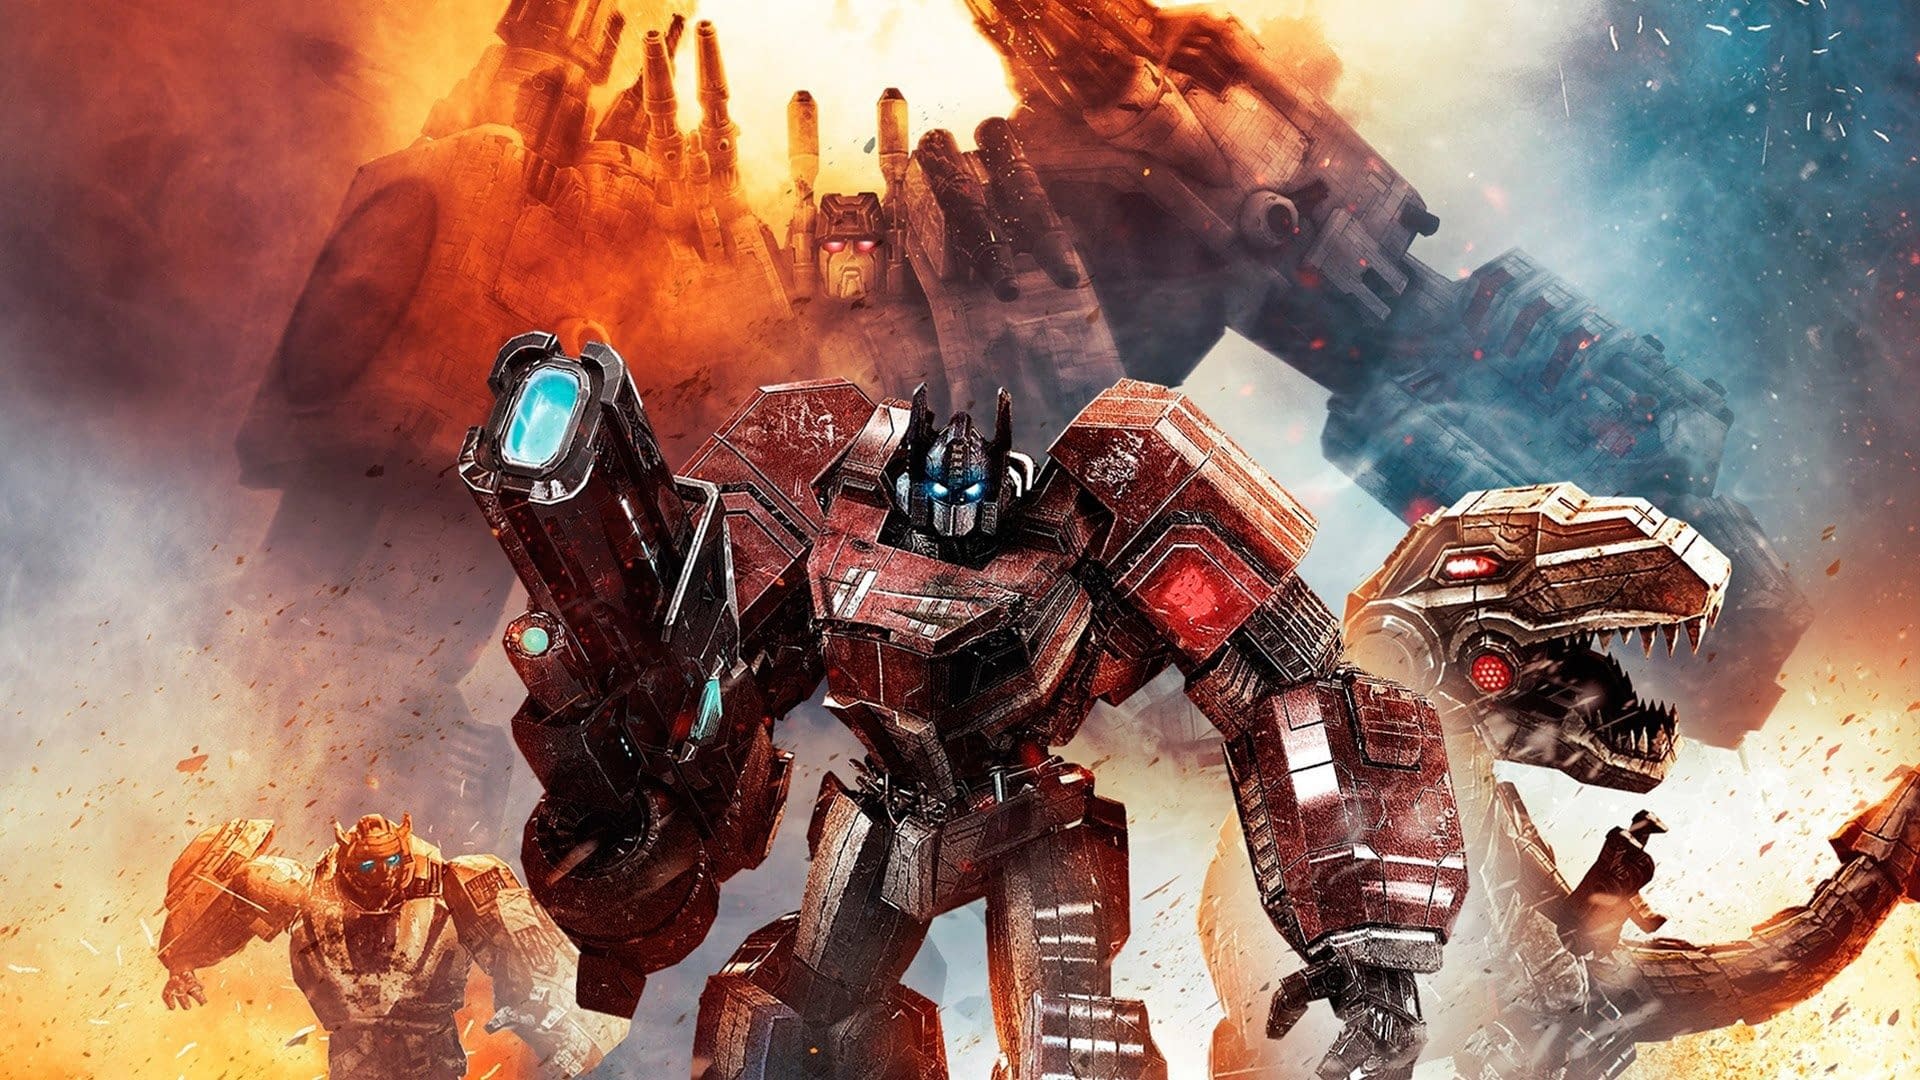 Hasbro Wants to Come Transformers Games to Xbox Game Pass